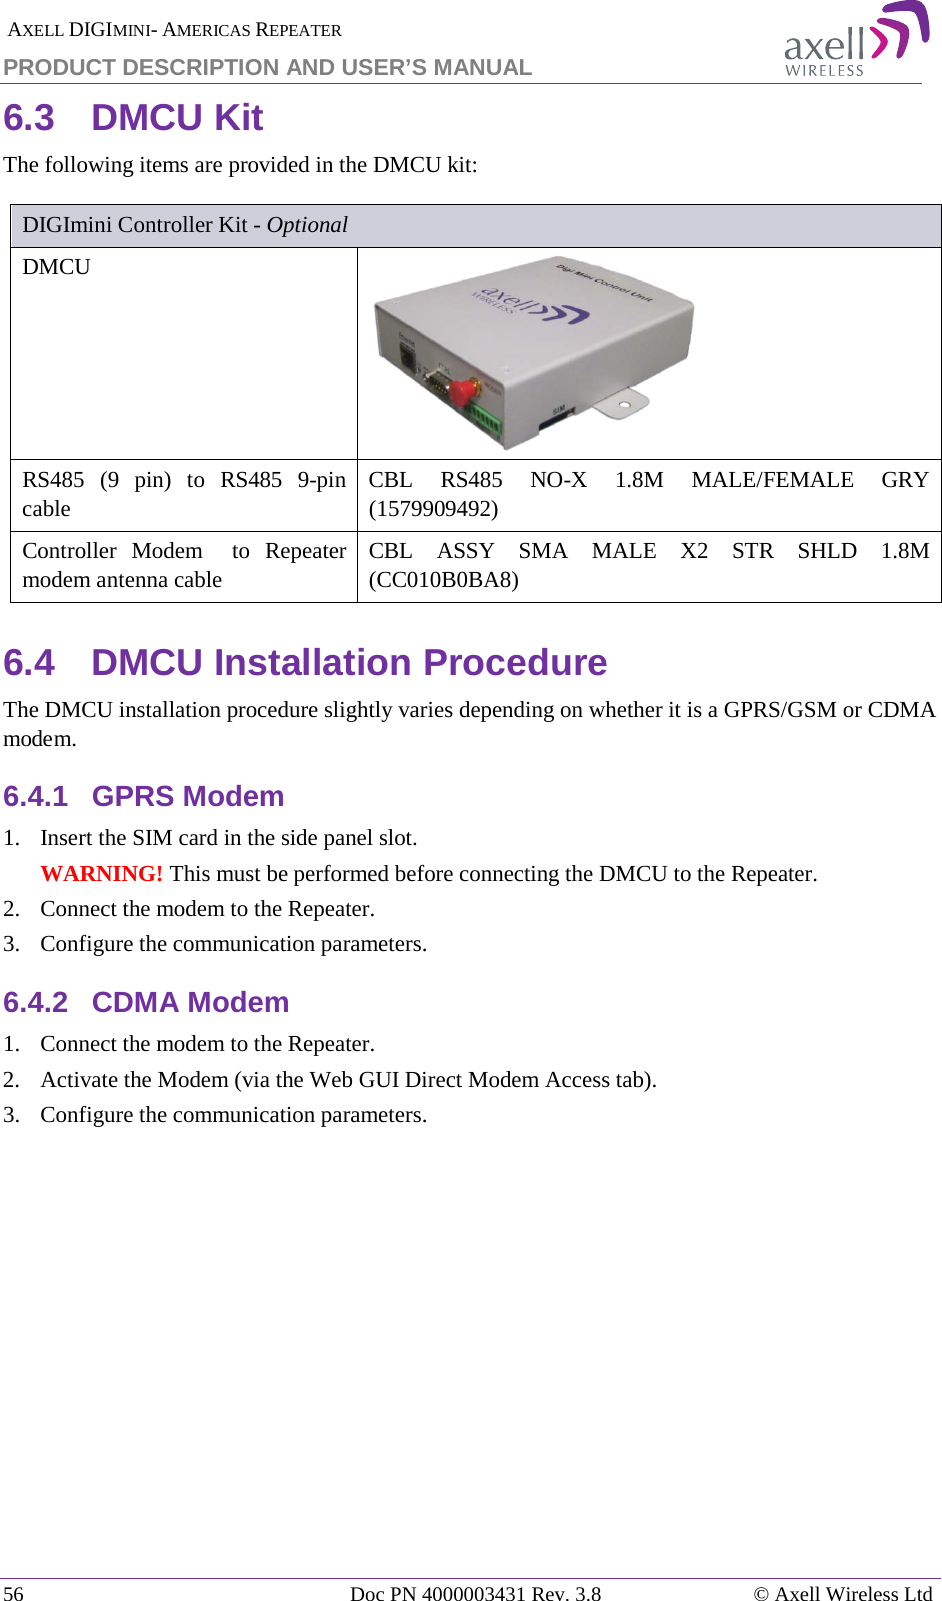  AXELL DIGIMINI- AMERICAS REPEATER PRODUCT DESCRIPTION AND USER’S MANUAL 56   Doc PN 4000003431 Rev. 3.8 © Axell Wireless Ltd 6.3  DMCU Kit The following items are provided in the DMCU kit:  DIGImini Controller Kit - Optional DMCU   RS485  (9 pin) to RS485  9-pin cable CBL  RS485  NO-X 1.8M MALE/FEMALE GRY (1579909492) Controller Modem  to Repeater modem antenna cable CBL ASSY SMA MALE X2 STR SHLD 1.8M (CC010B0BA8) 6.4  DMCU Installation Procedure The DMCU installation procedure slightly varies depending on whether it is a GPRS/GSM or CDMA modem. 6.4.1  GPRS Modem 1.  Insert the SIM card in the side panel slot. WARNING! This must be performed before connecting the DMCU to the Repeater. 2.  Connect the modem to the Repeater. 3.  Configure the communication parameters. 6.4.2  CDMA Modem 1.  Connect the modem to the Repeater. 2.  Activate the Modem (via the Web GUI Direct Modem Access tab).  3.  Configure the communication parameters.    